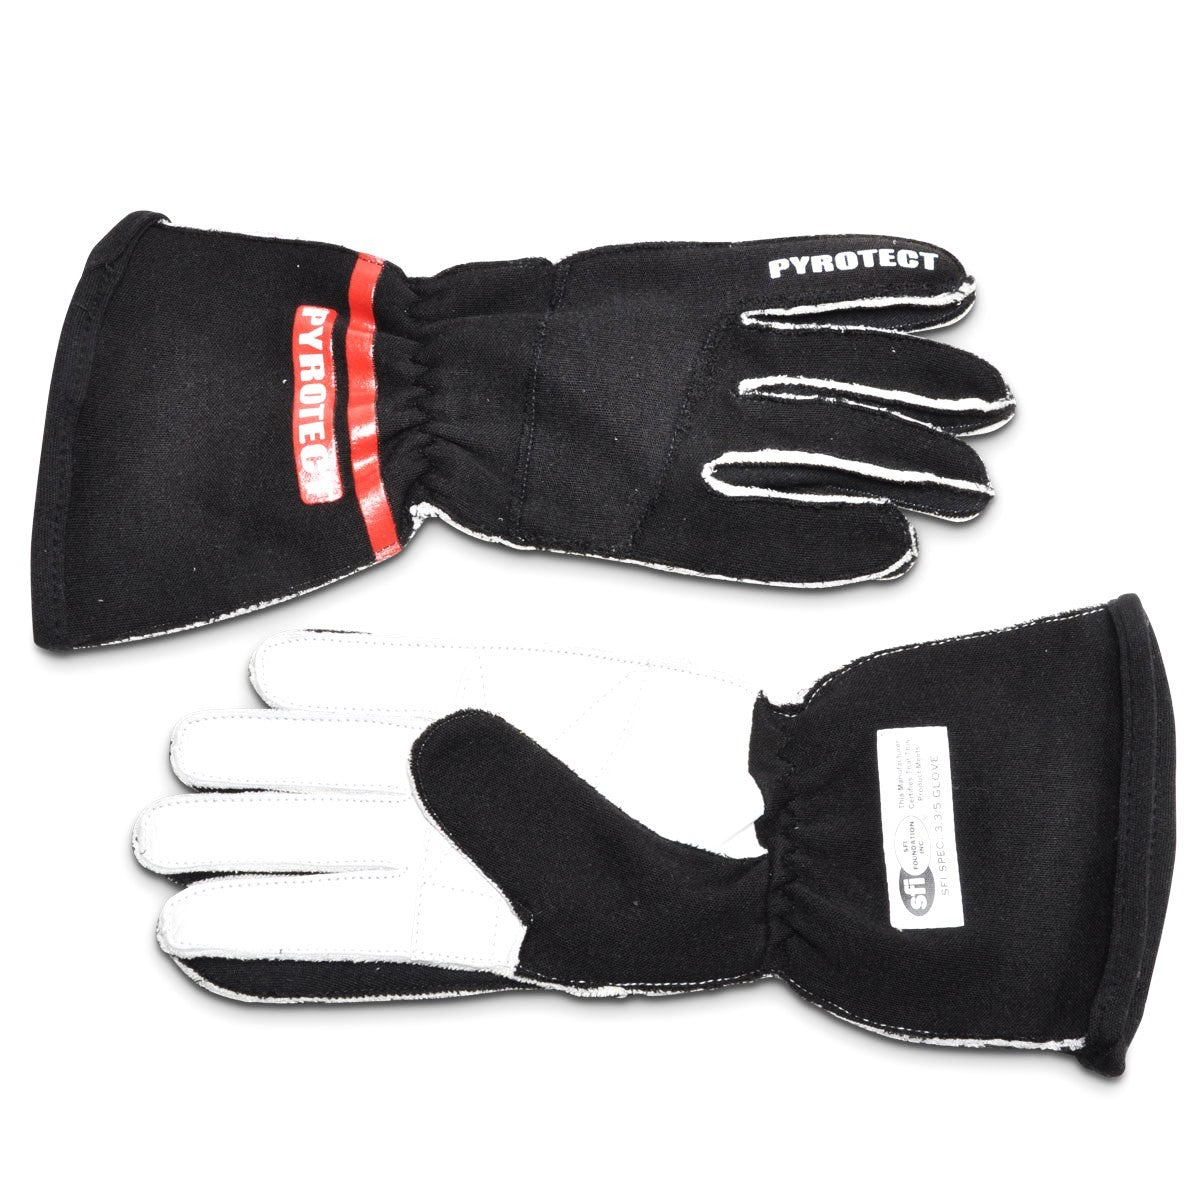 Pyrotect Glove PRO 2 Layer Black X-Large SFI-5 Safety Clothing Driving Gloves main image